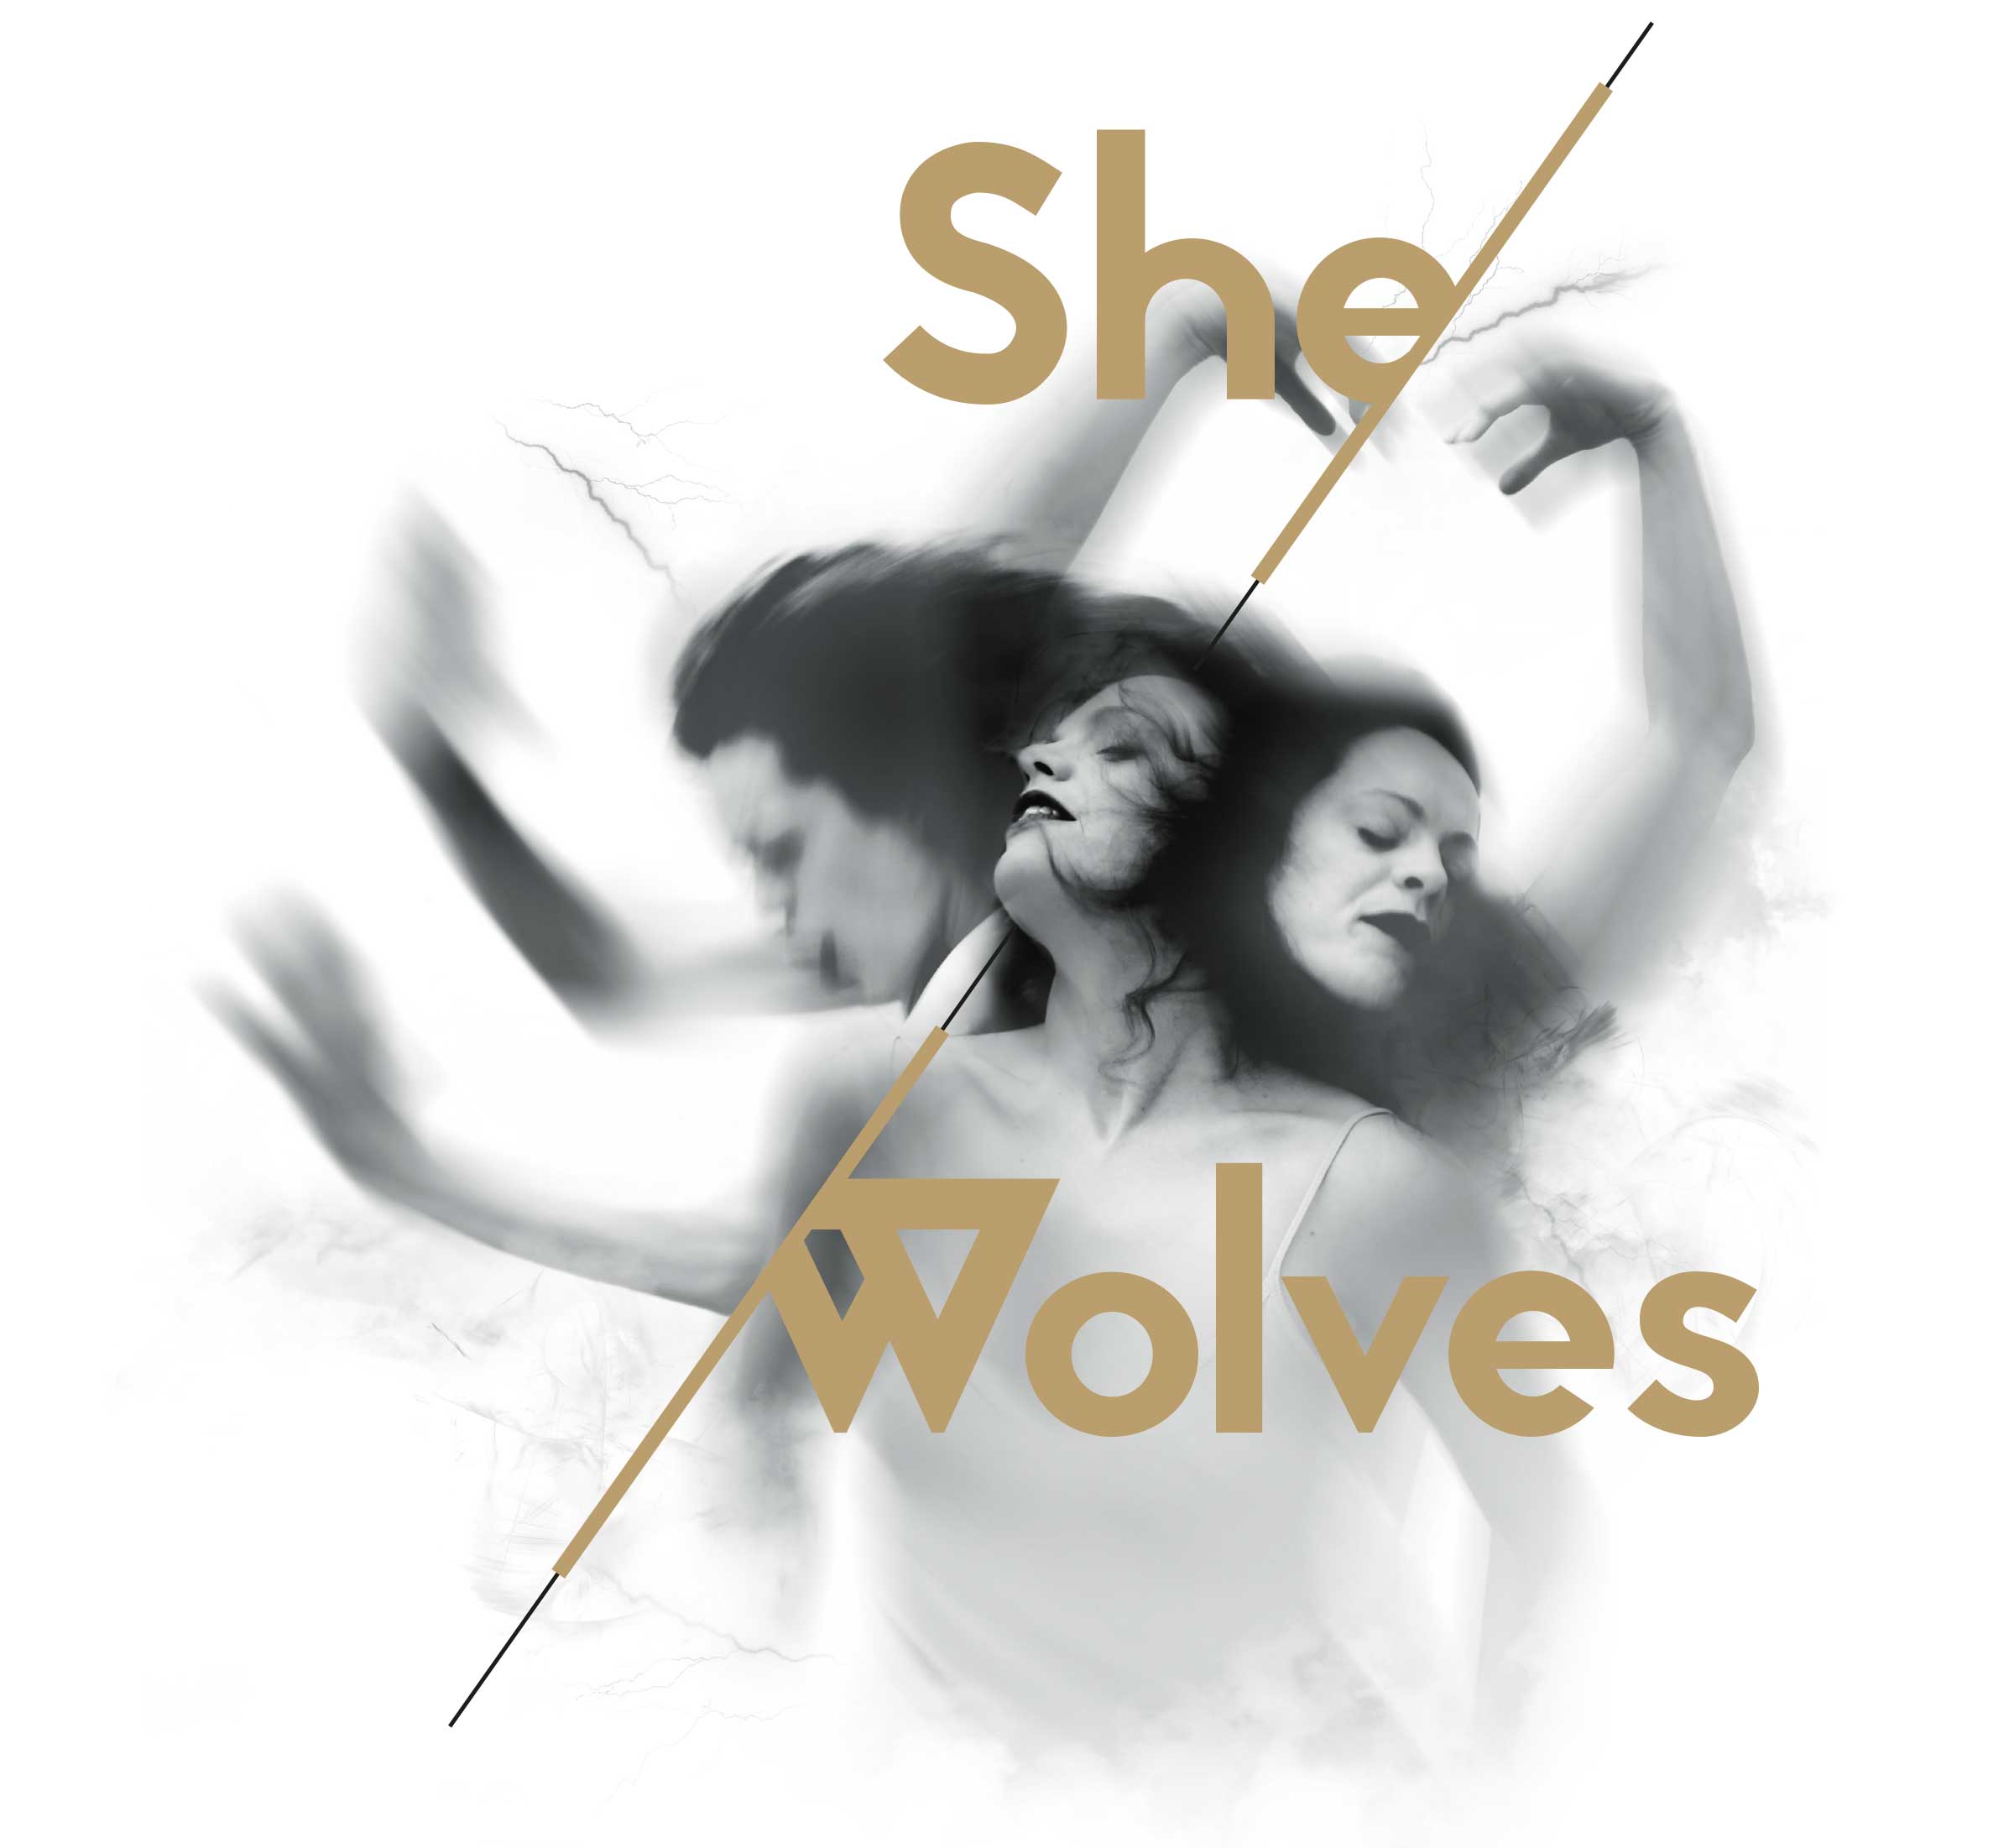 She-Wolves Project – dance, theatre and history production created and performed by Laura Careless, based BBC series and book by historian Helen Castor